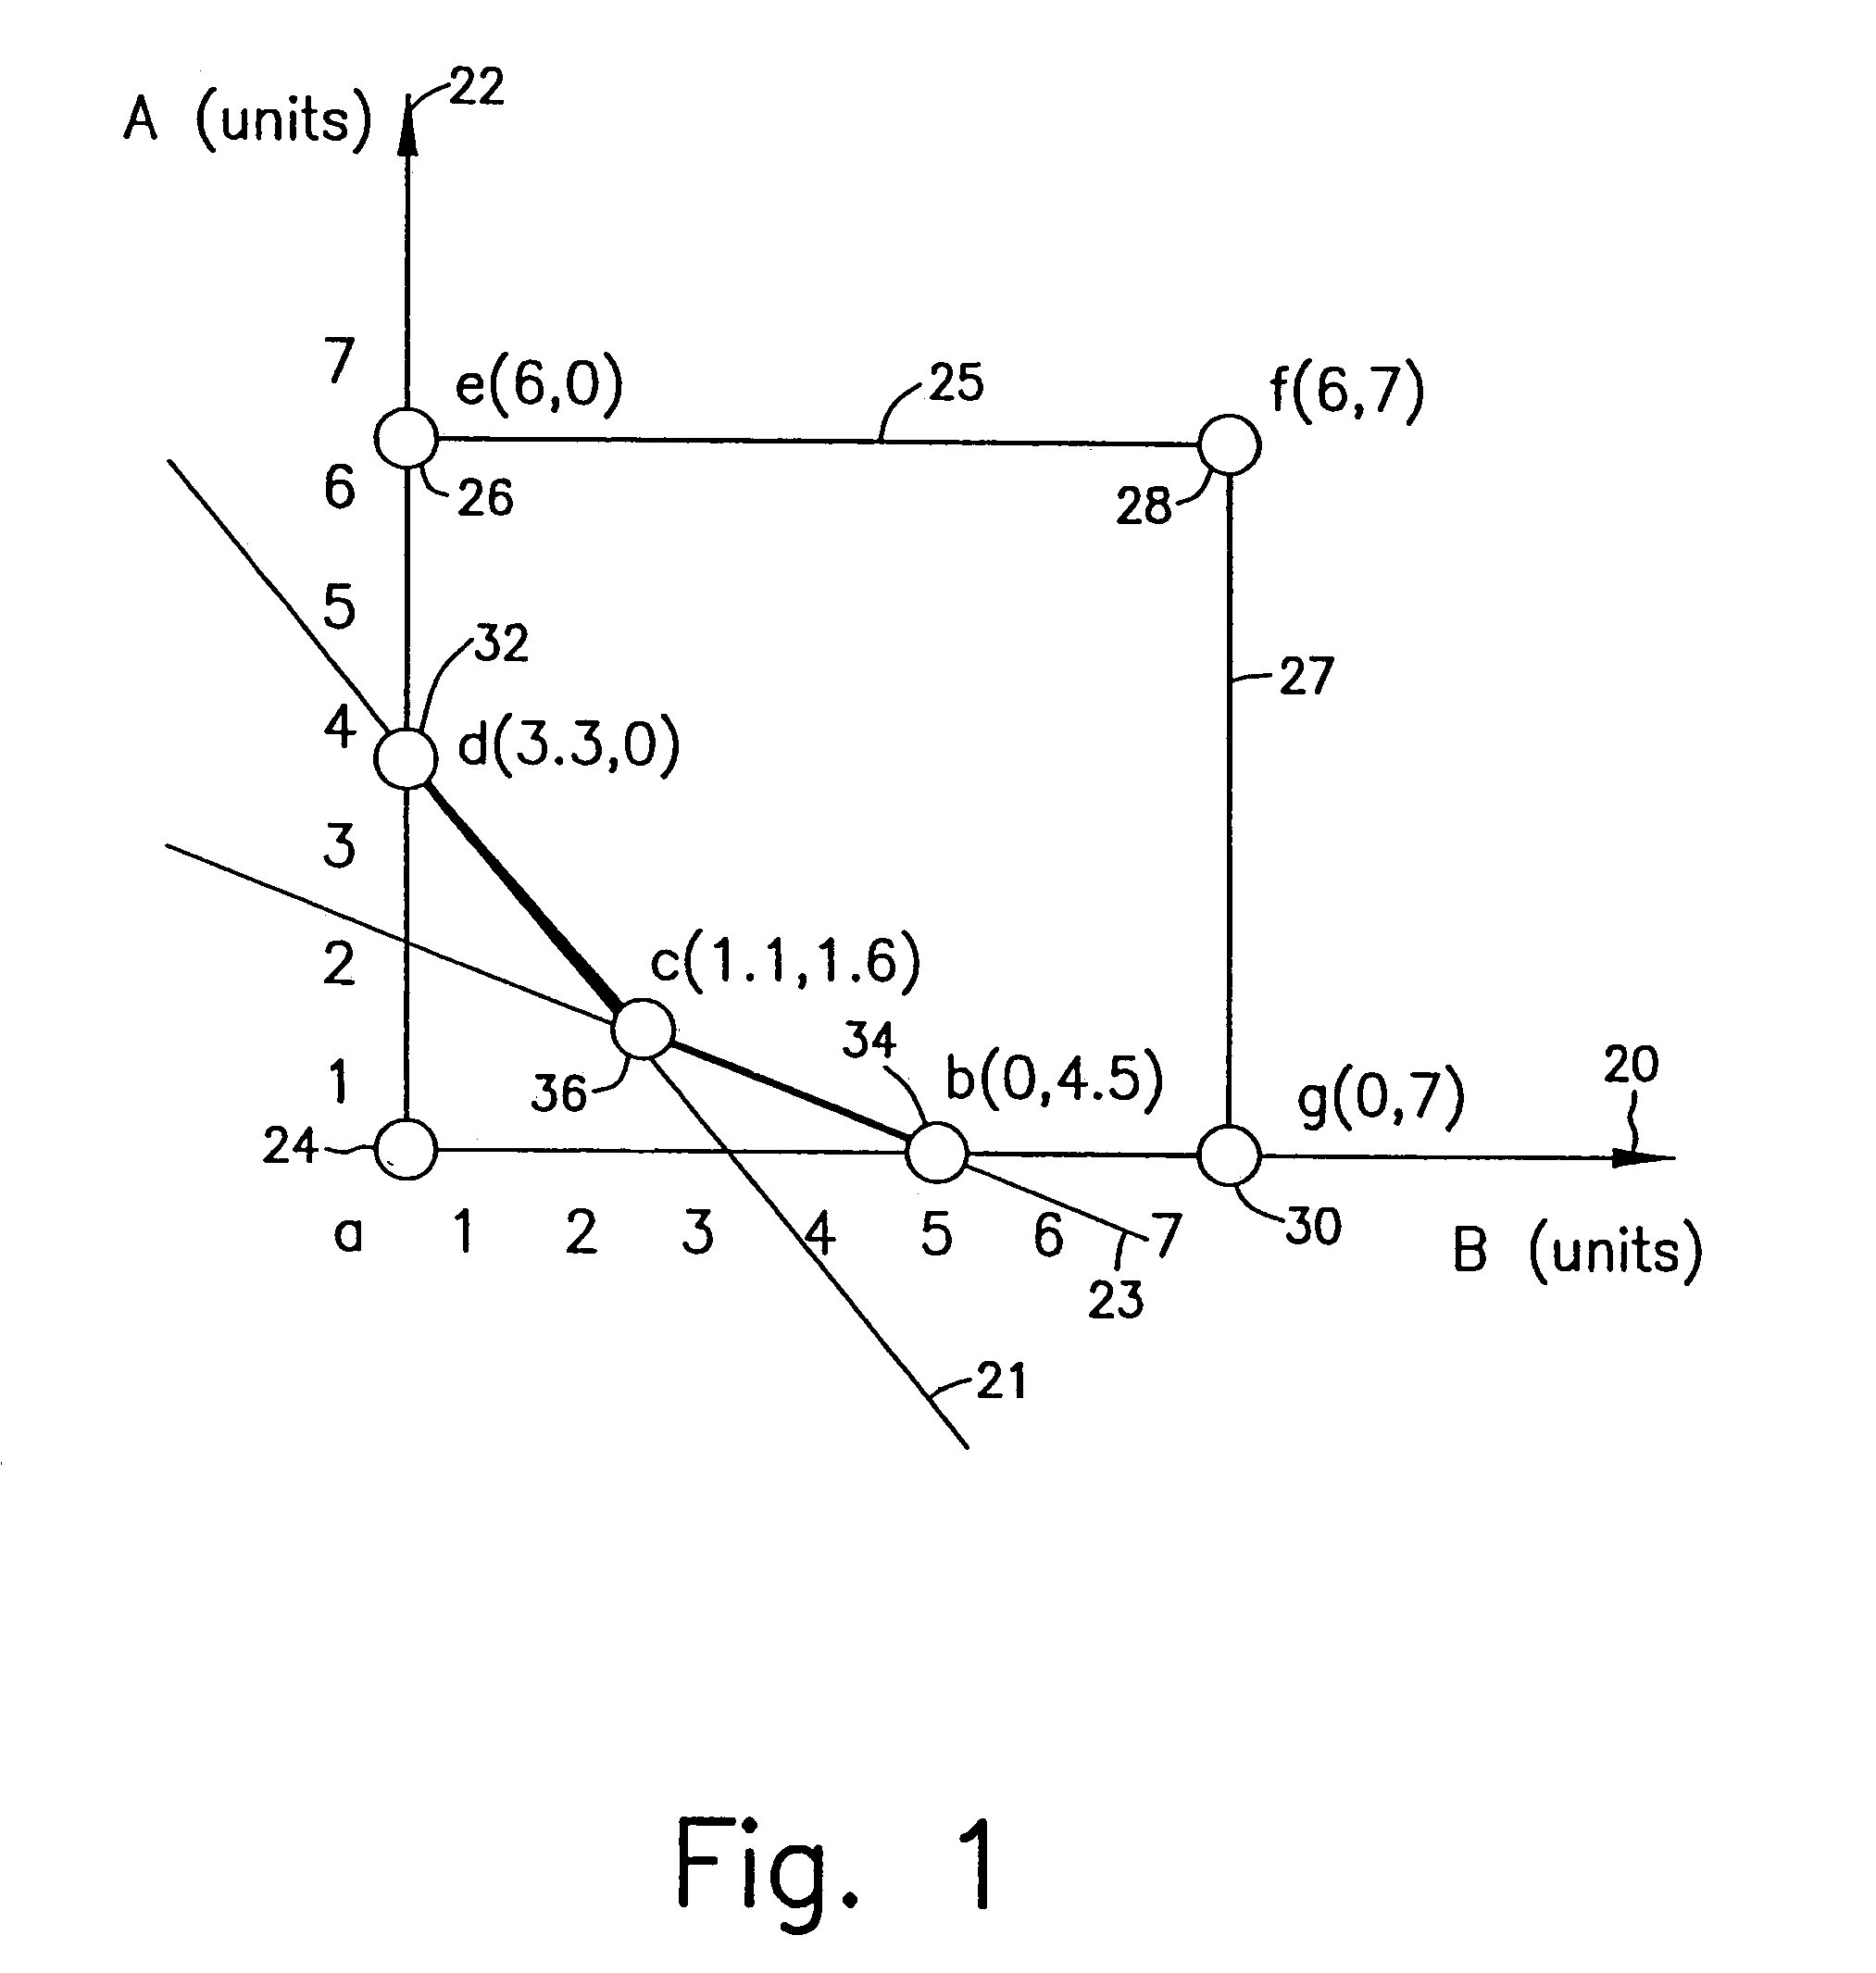 Method and system for determining an economically optimal dismantling of machines